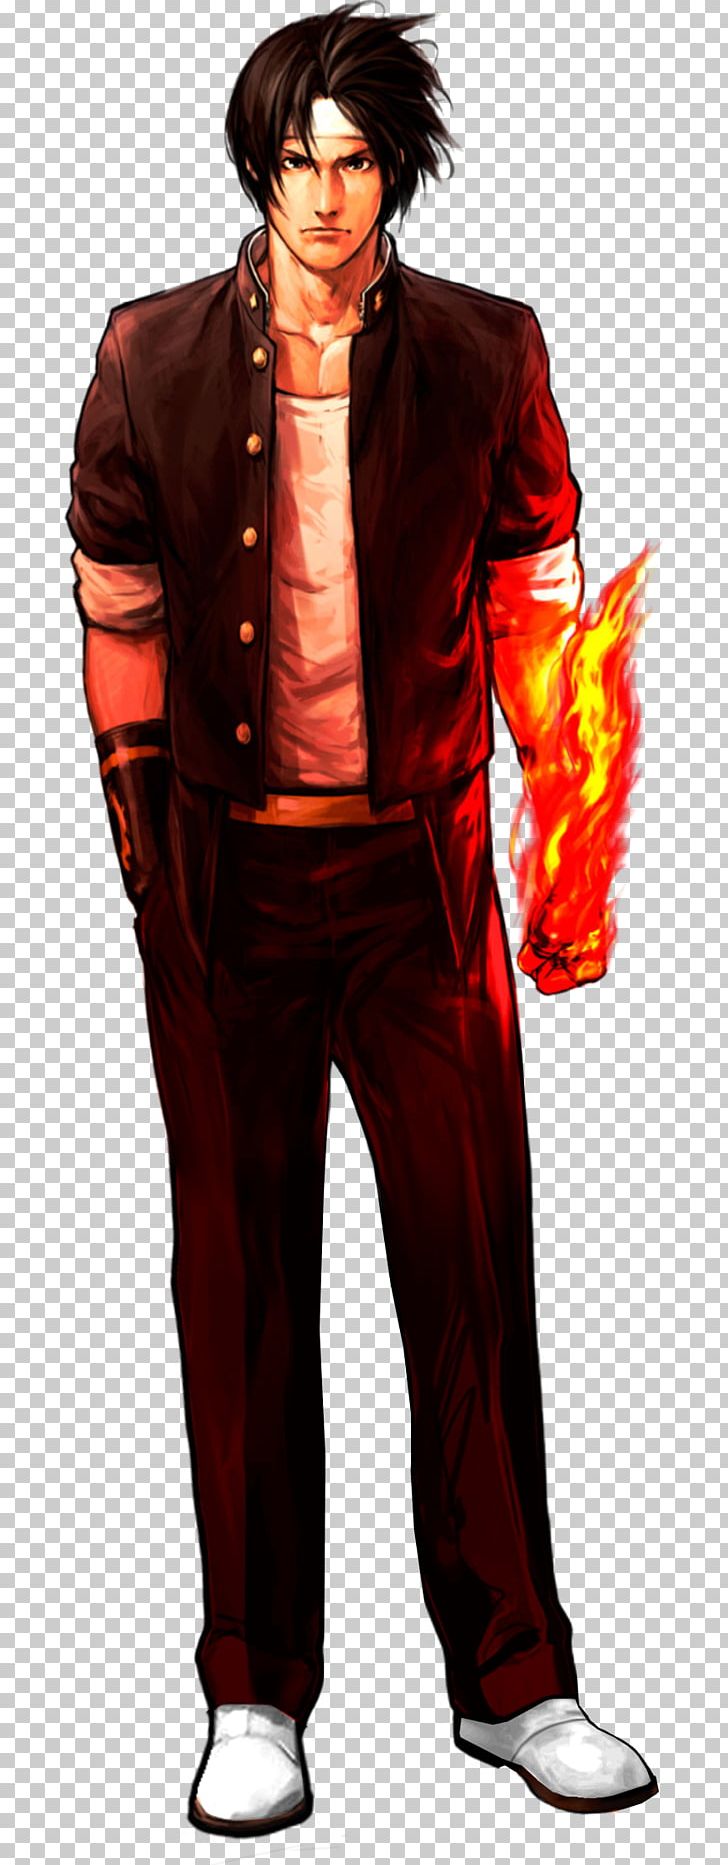 The King Of Fighters '98 The King Of Fighters '97 The King Of Fighters XIV Iori Yagami Kyo Kusanagi PNG, Clipart, Costume, Costume Design, Fictional Character, Fighting Game, Gaming Free PNG Download